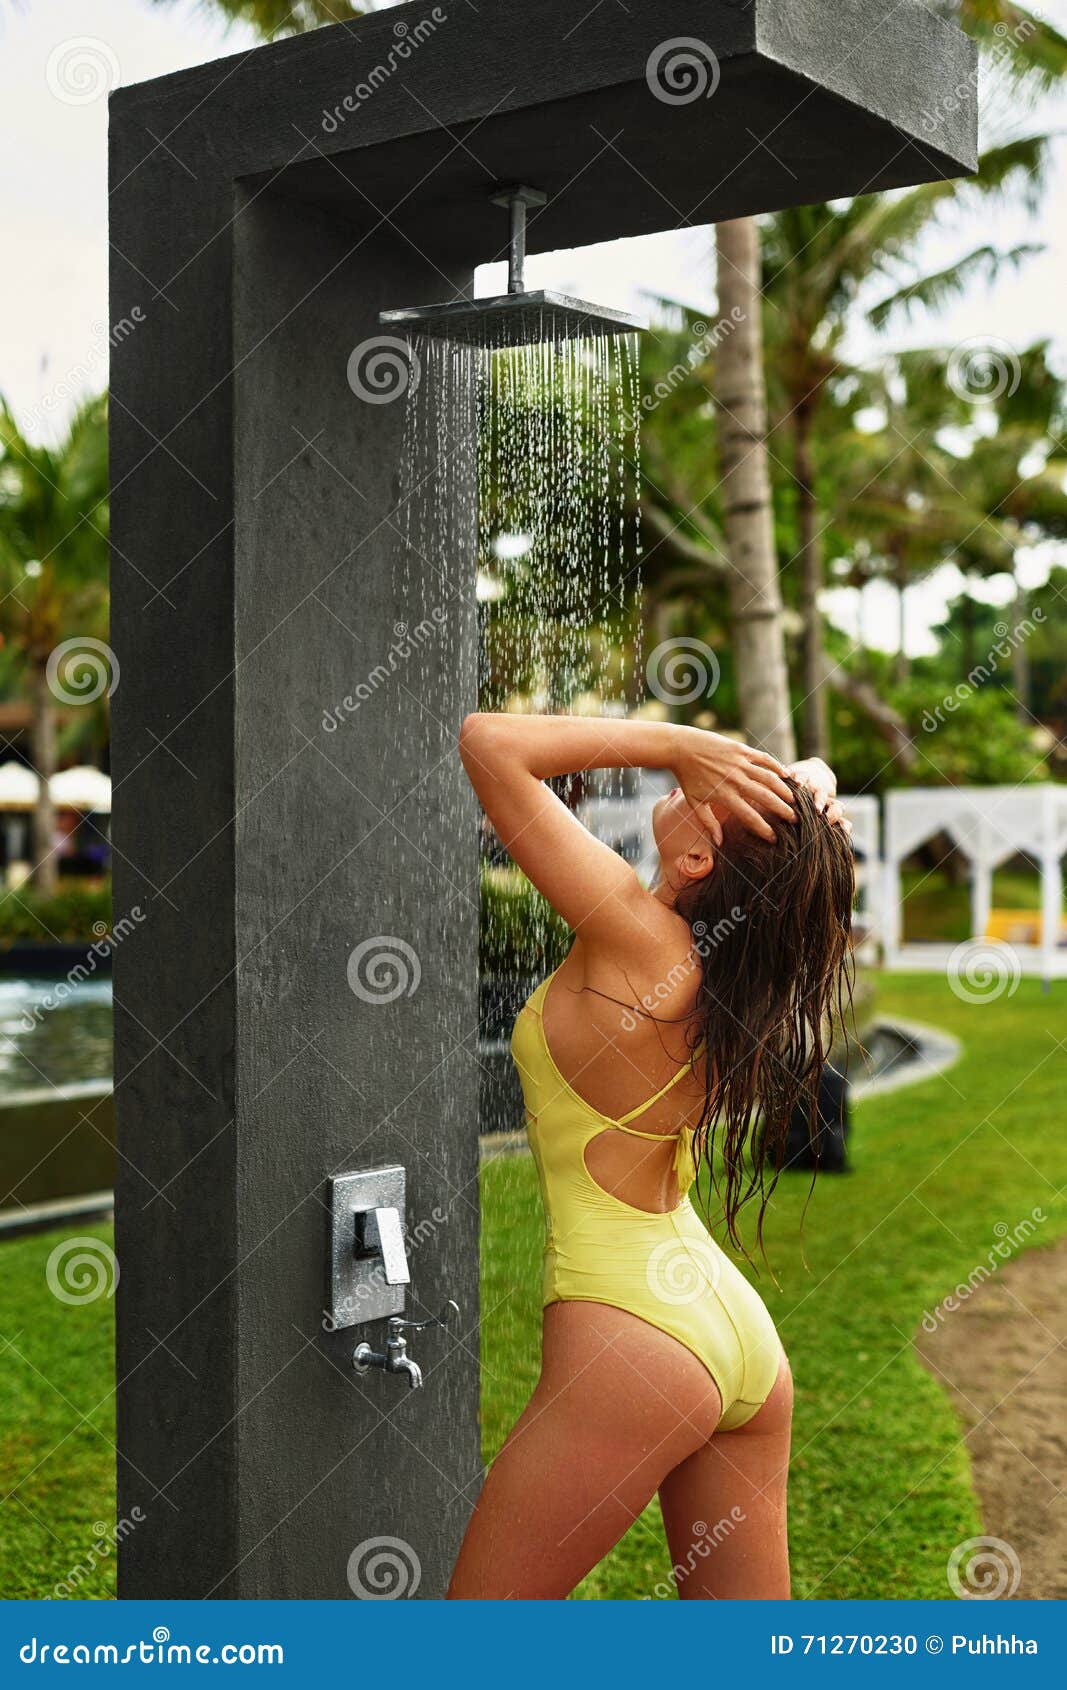 Shower On Beach Woman In Swimsuit Showering At Pool Shower Stock